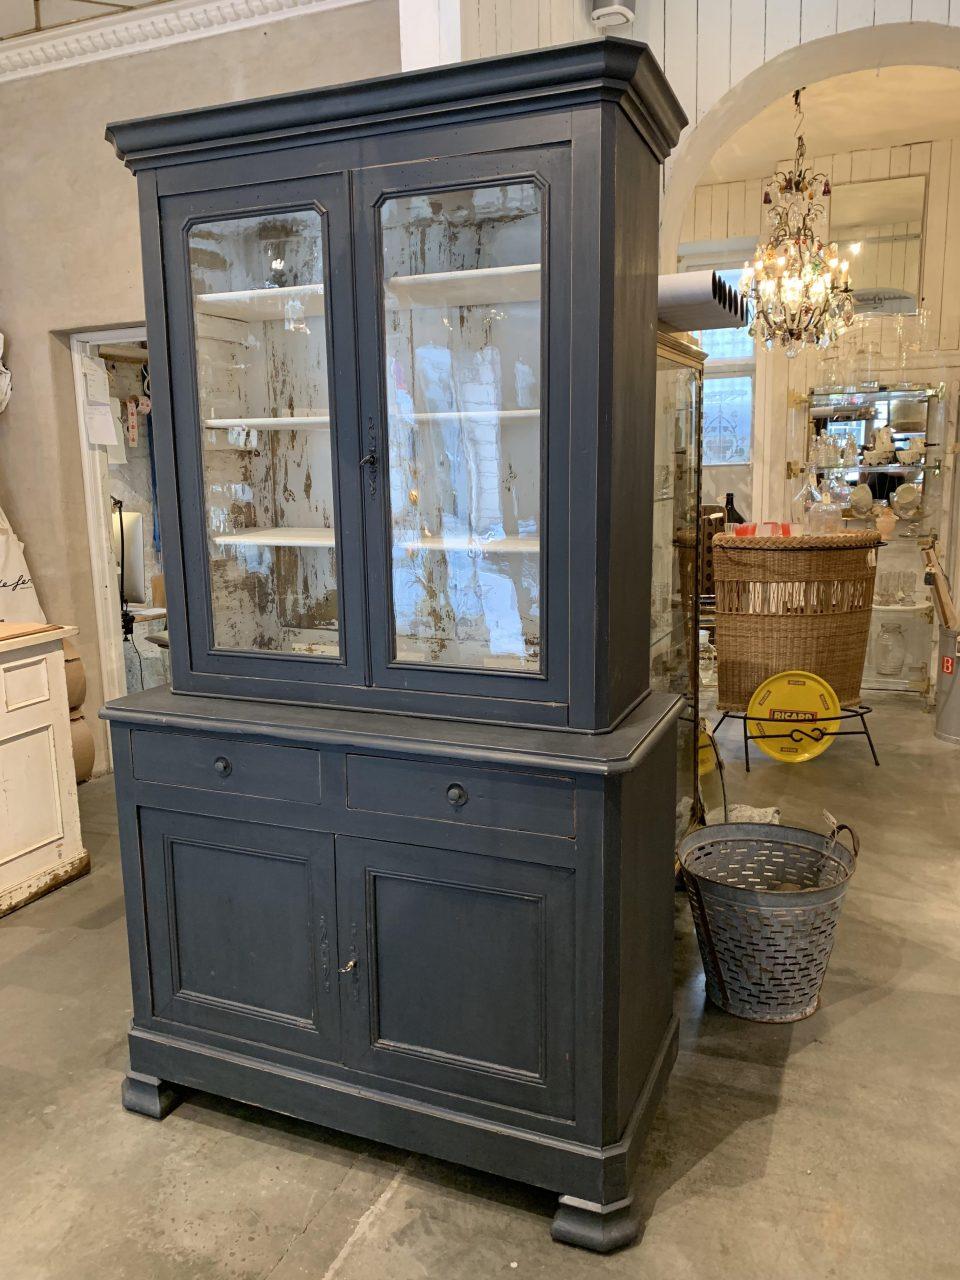 Handsome French 2-part display cabinet. An ideal design for storing crockery and glasses. This lovely piece consists of a display unit with doors in original old glass, and the lower section has doors and 2 spacious drawers. The cabinet is painted